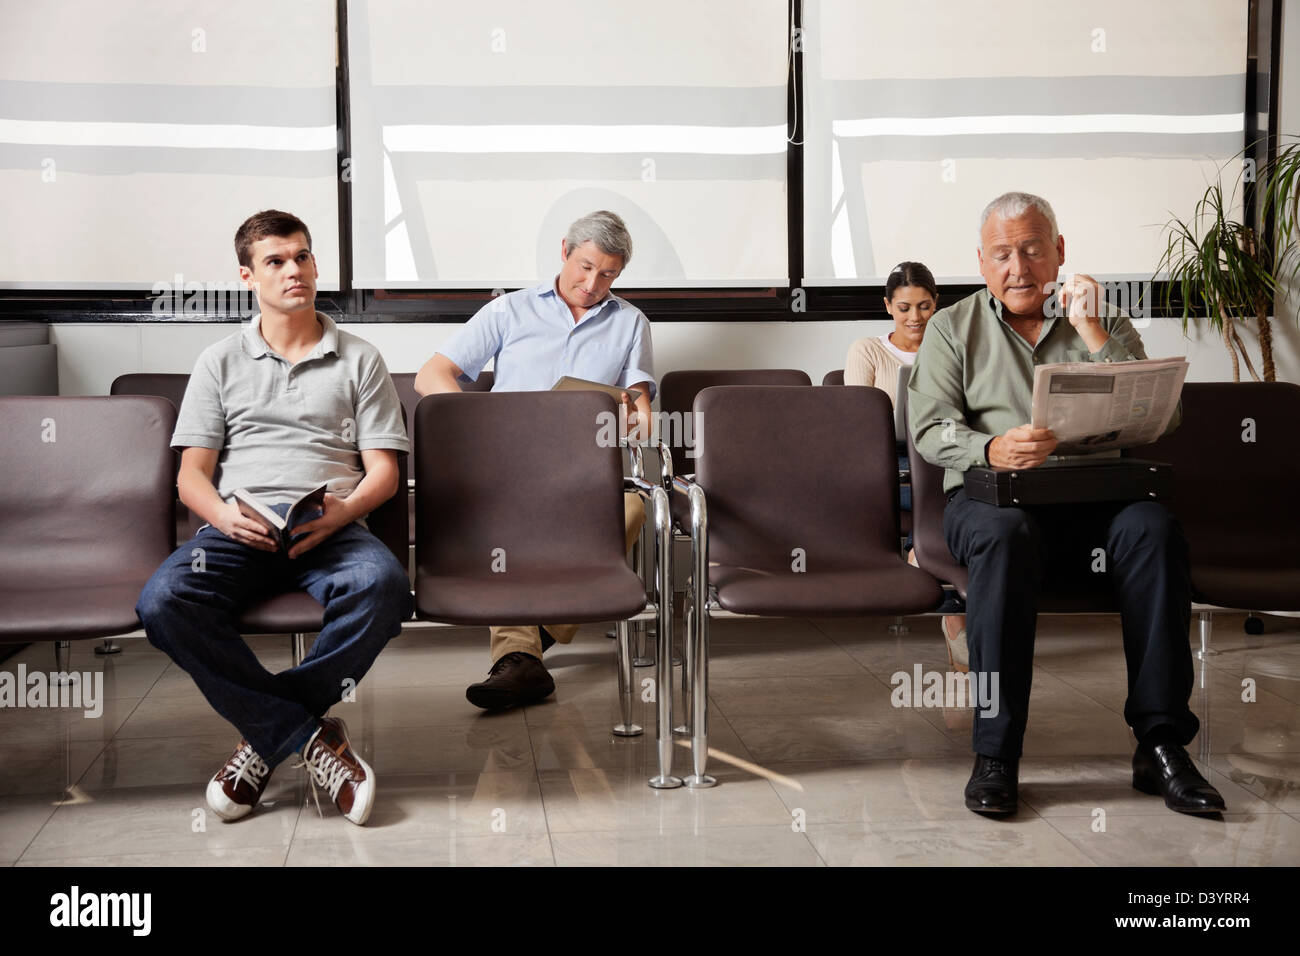 People Waiting In Hospital Lobby Stock Photo